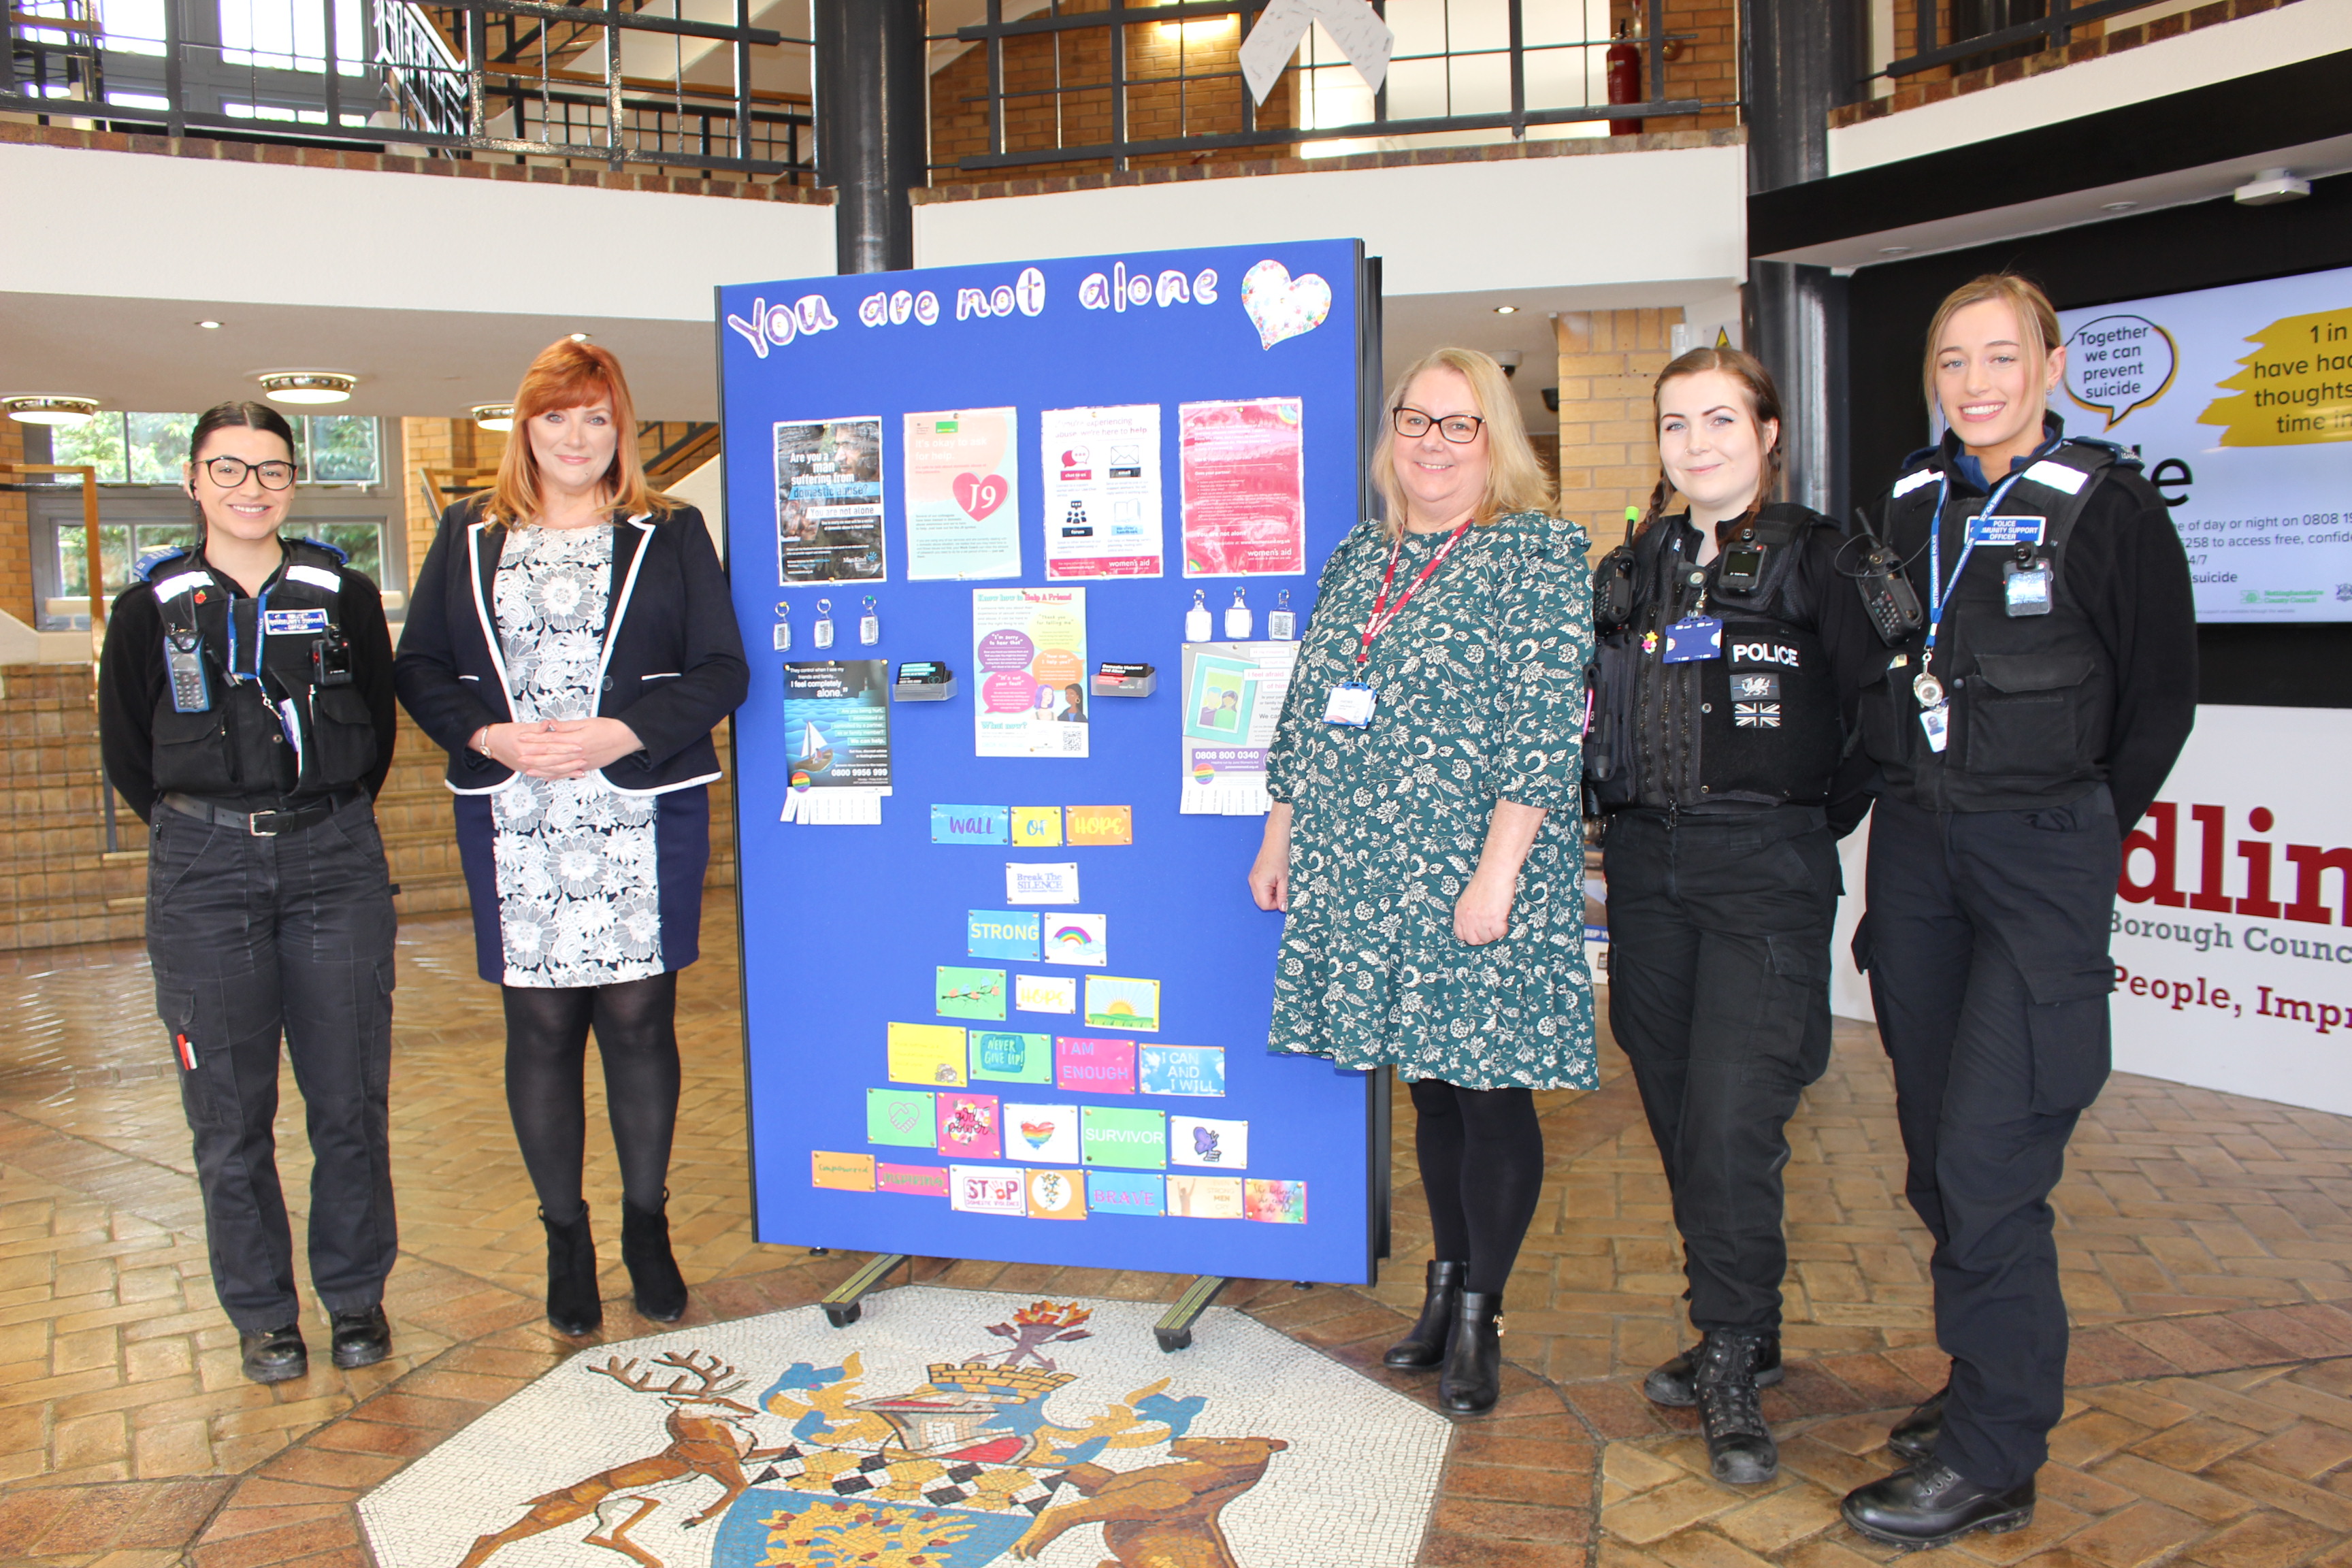 Staff with Police in front of the domestic violence support board